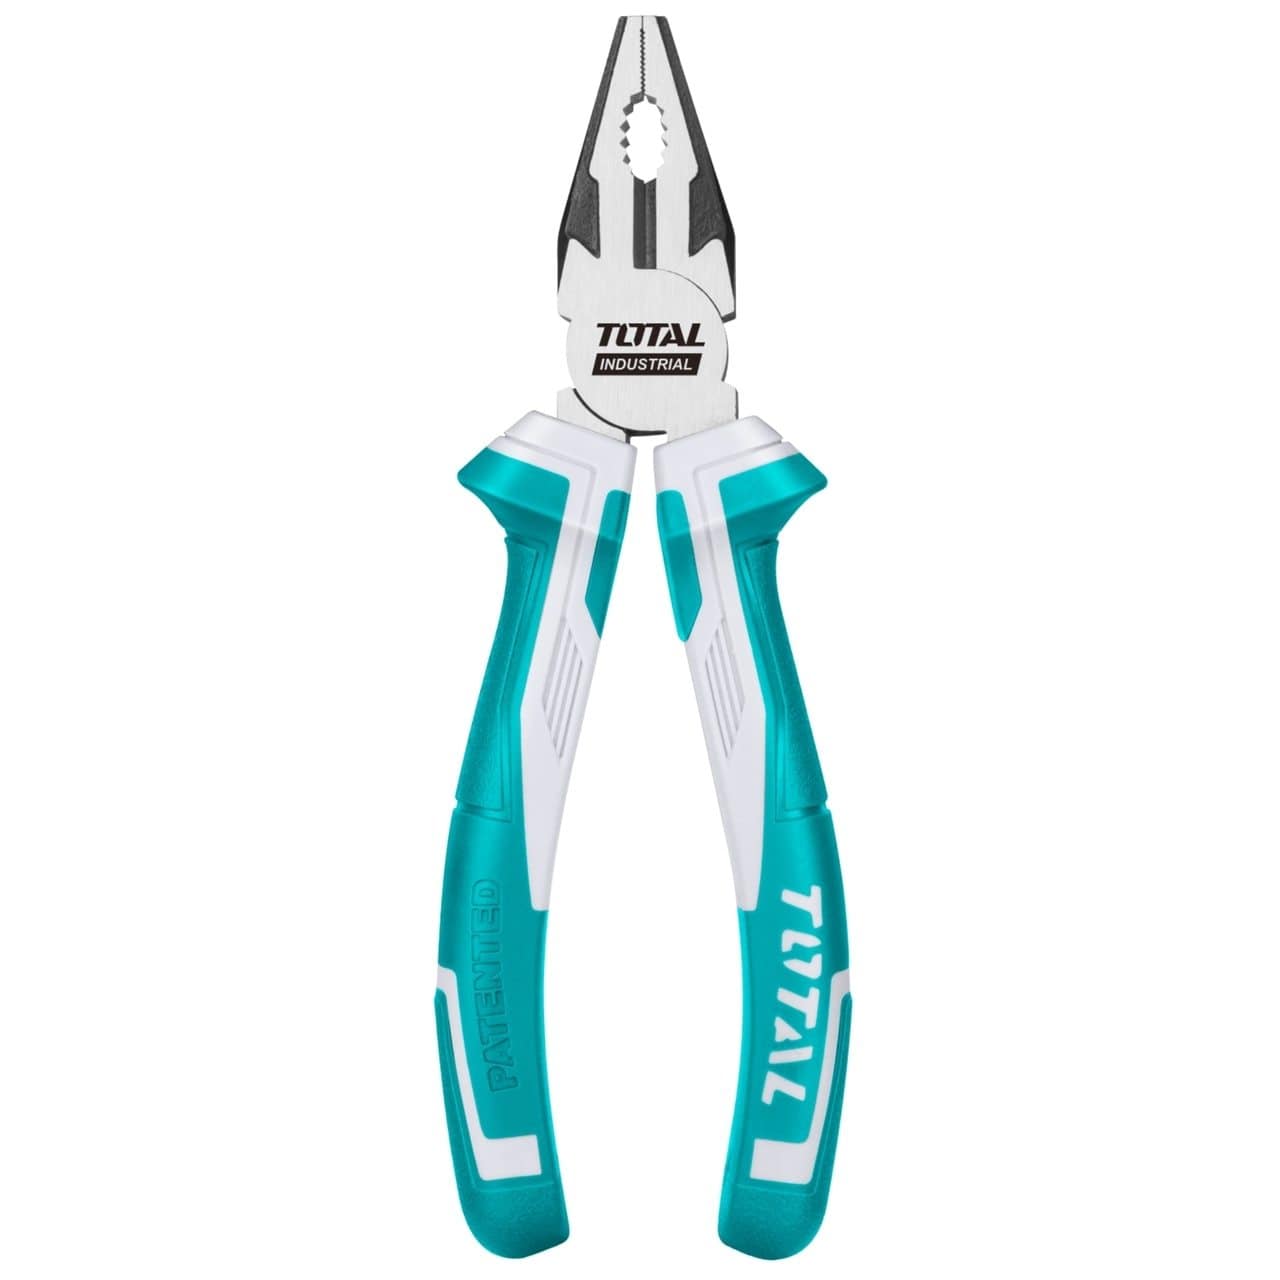 Total Combination Plier 8'' - THT110806P | Supply Master | Accra, Ghana Tools Building Steel Engineering Hardware tool